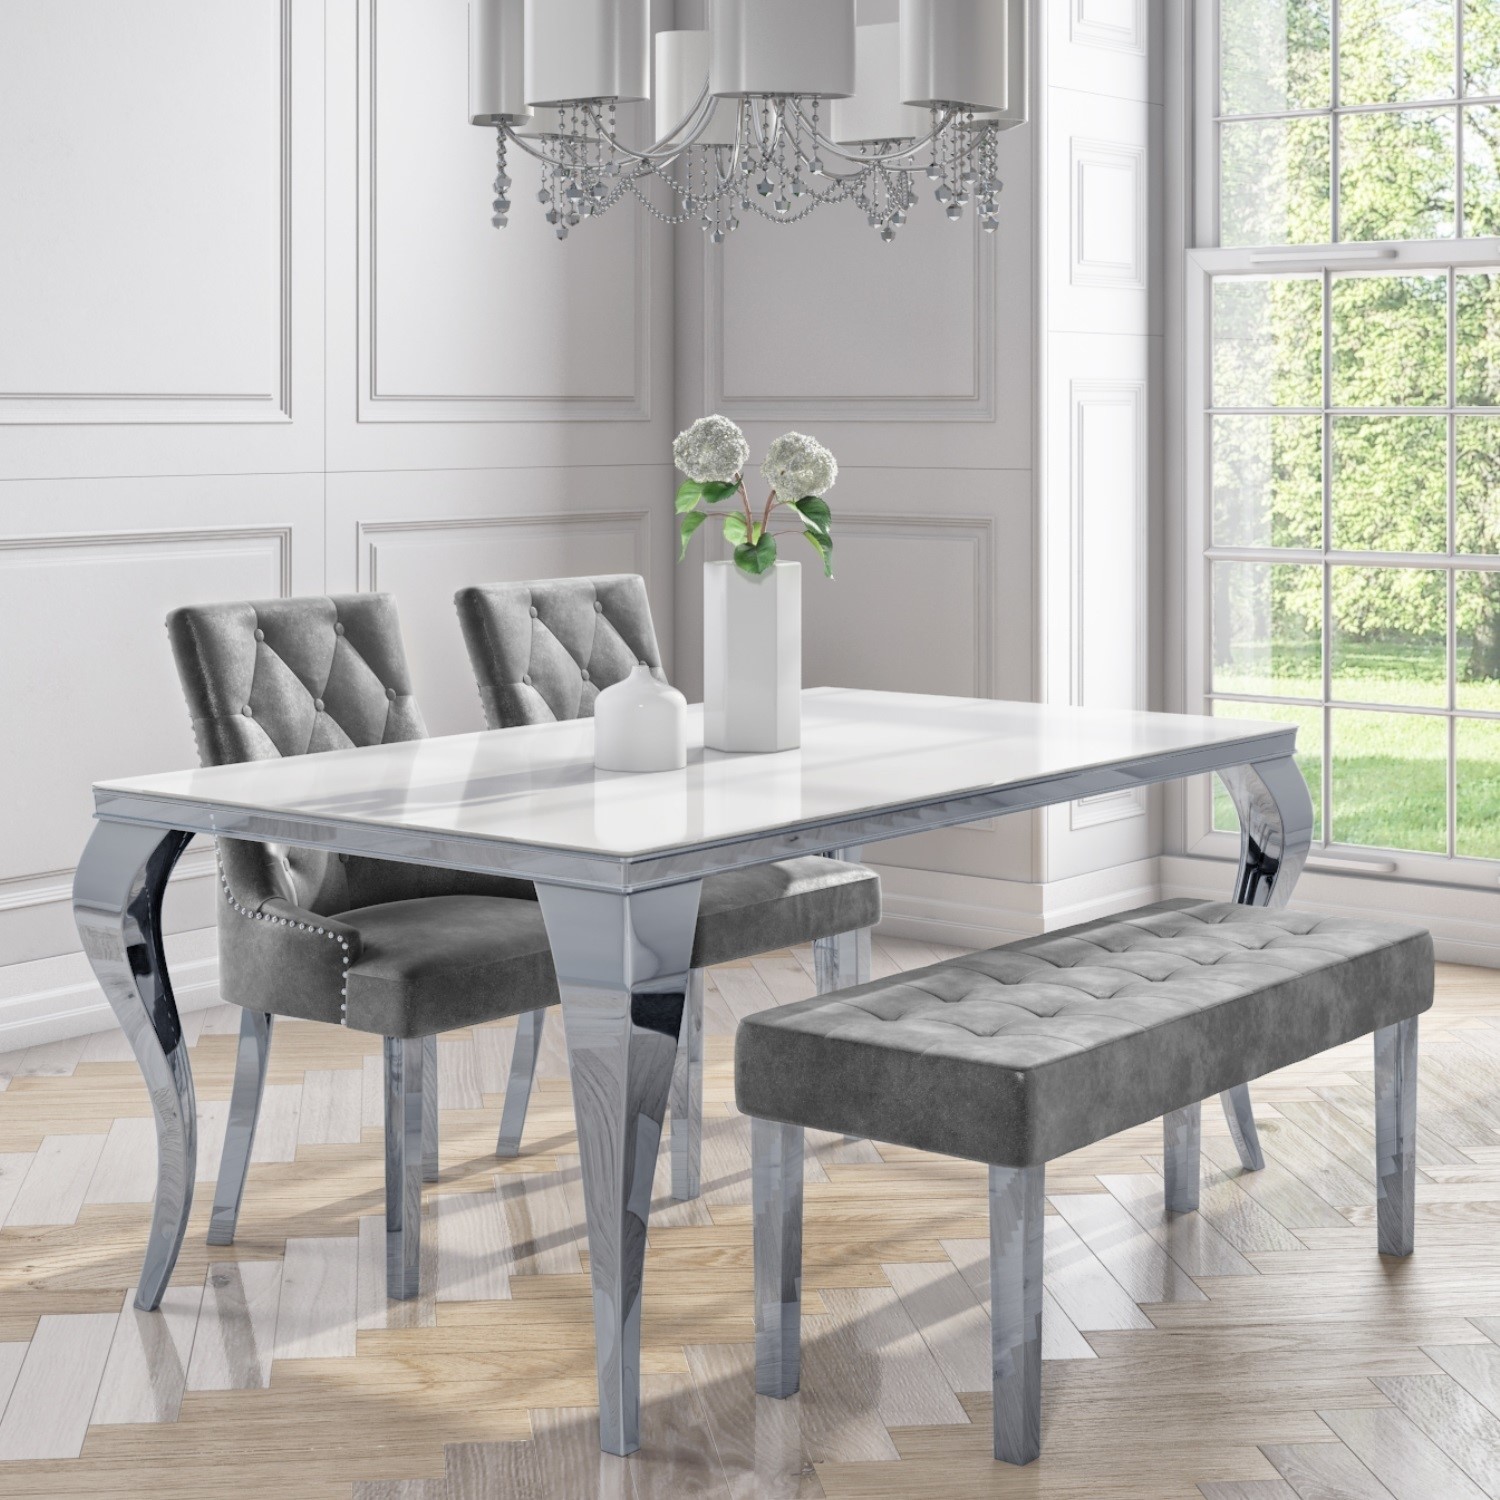 4 Seater Table And Chairs - 4 Seater Dining Set With White Table 2 Grey